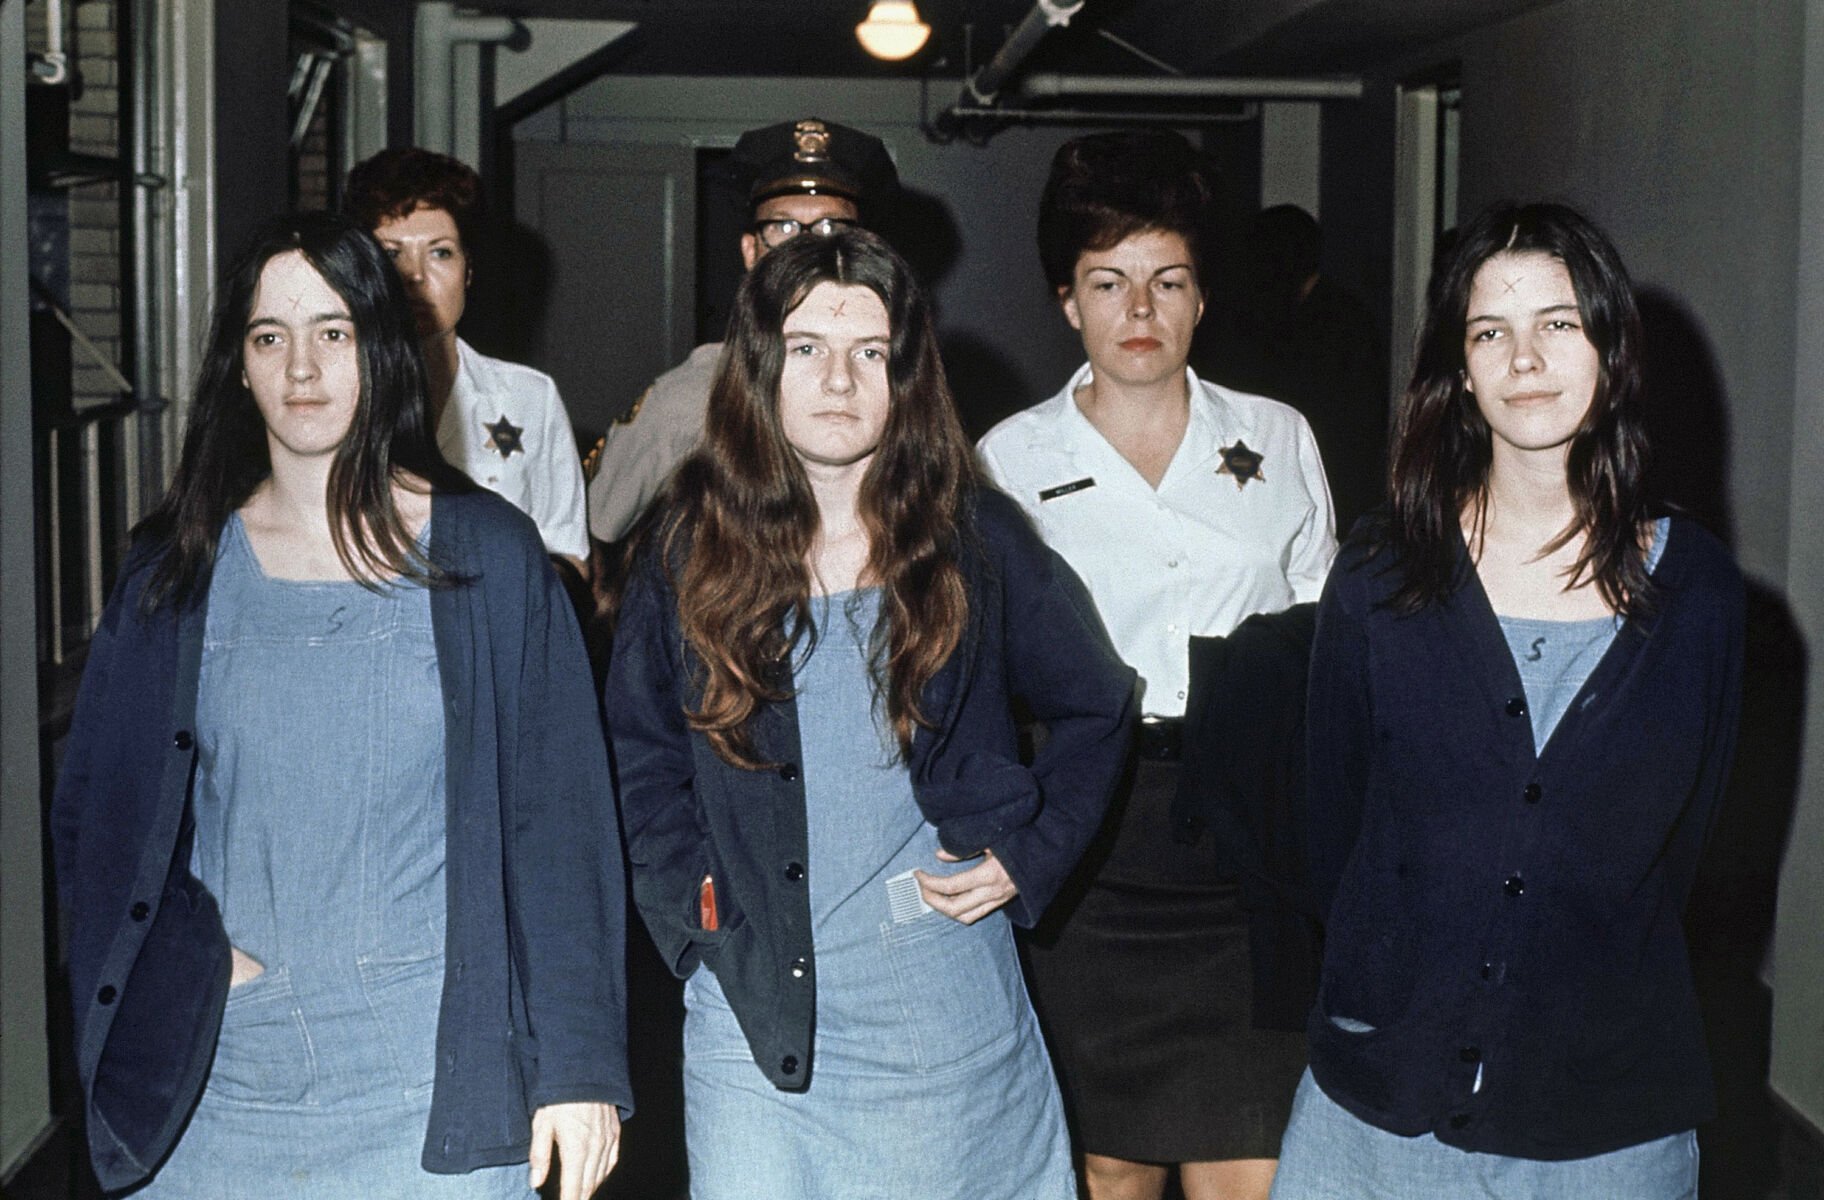 Murderer's release: Charles Manson 'family' member granted parole after ...